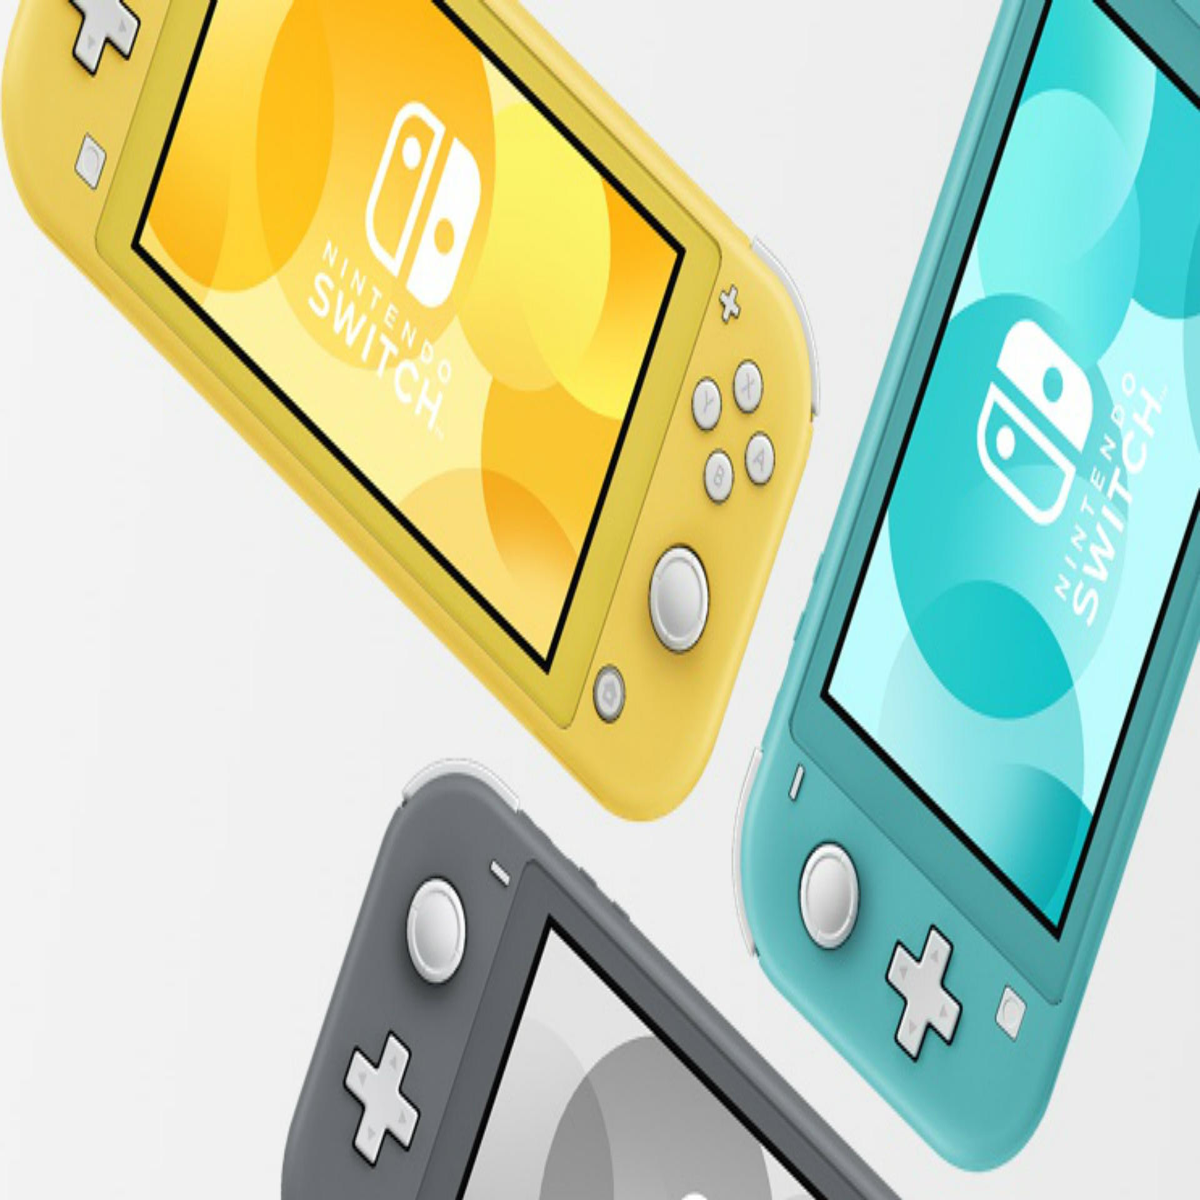 Nintendo Switch Lite is the best portable system Nintendo has ever